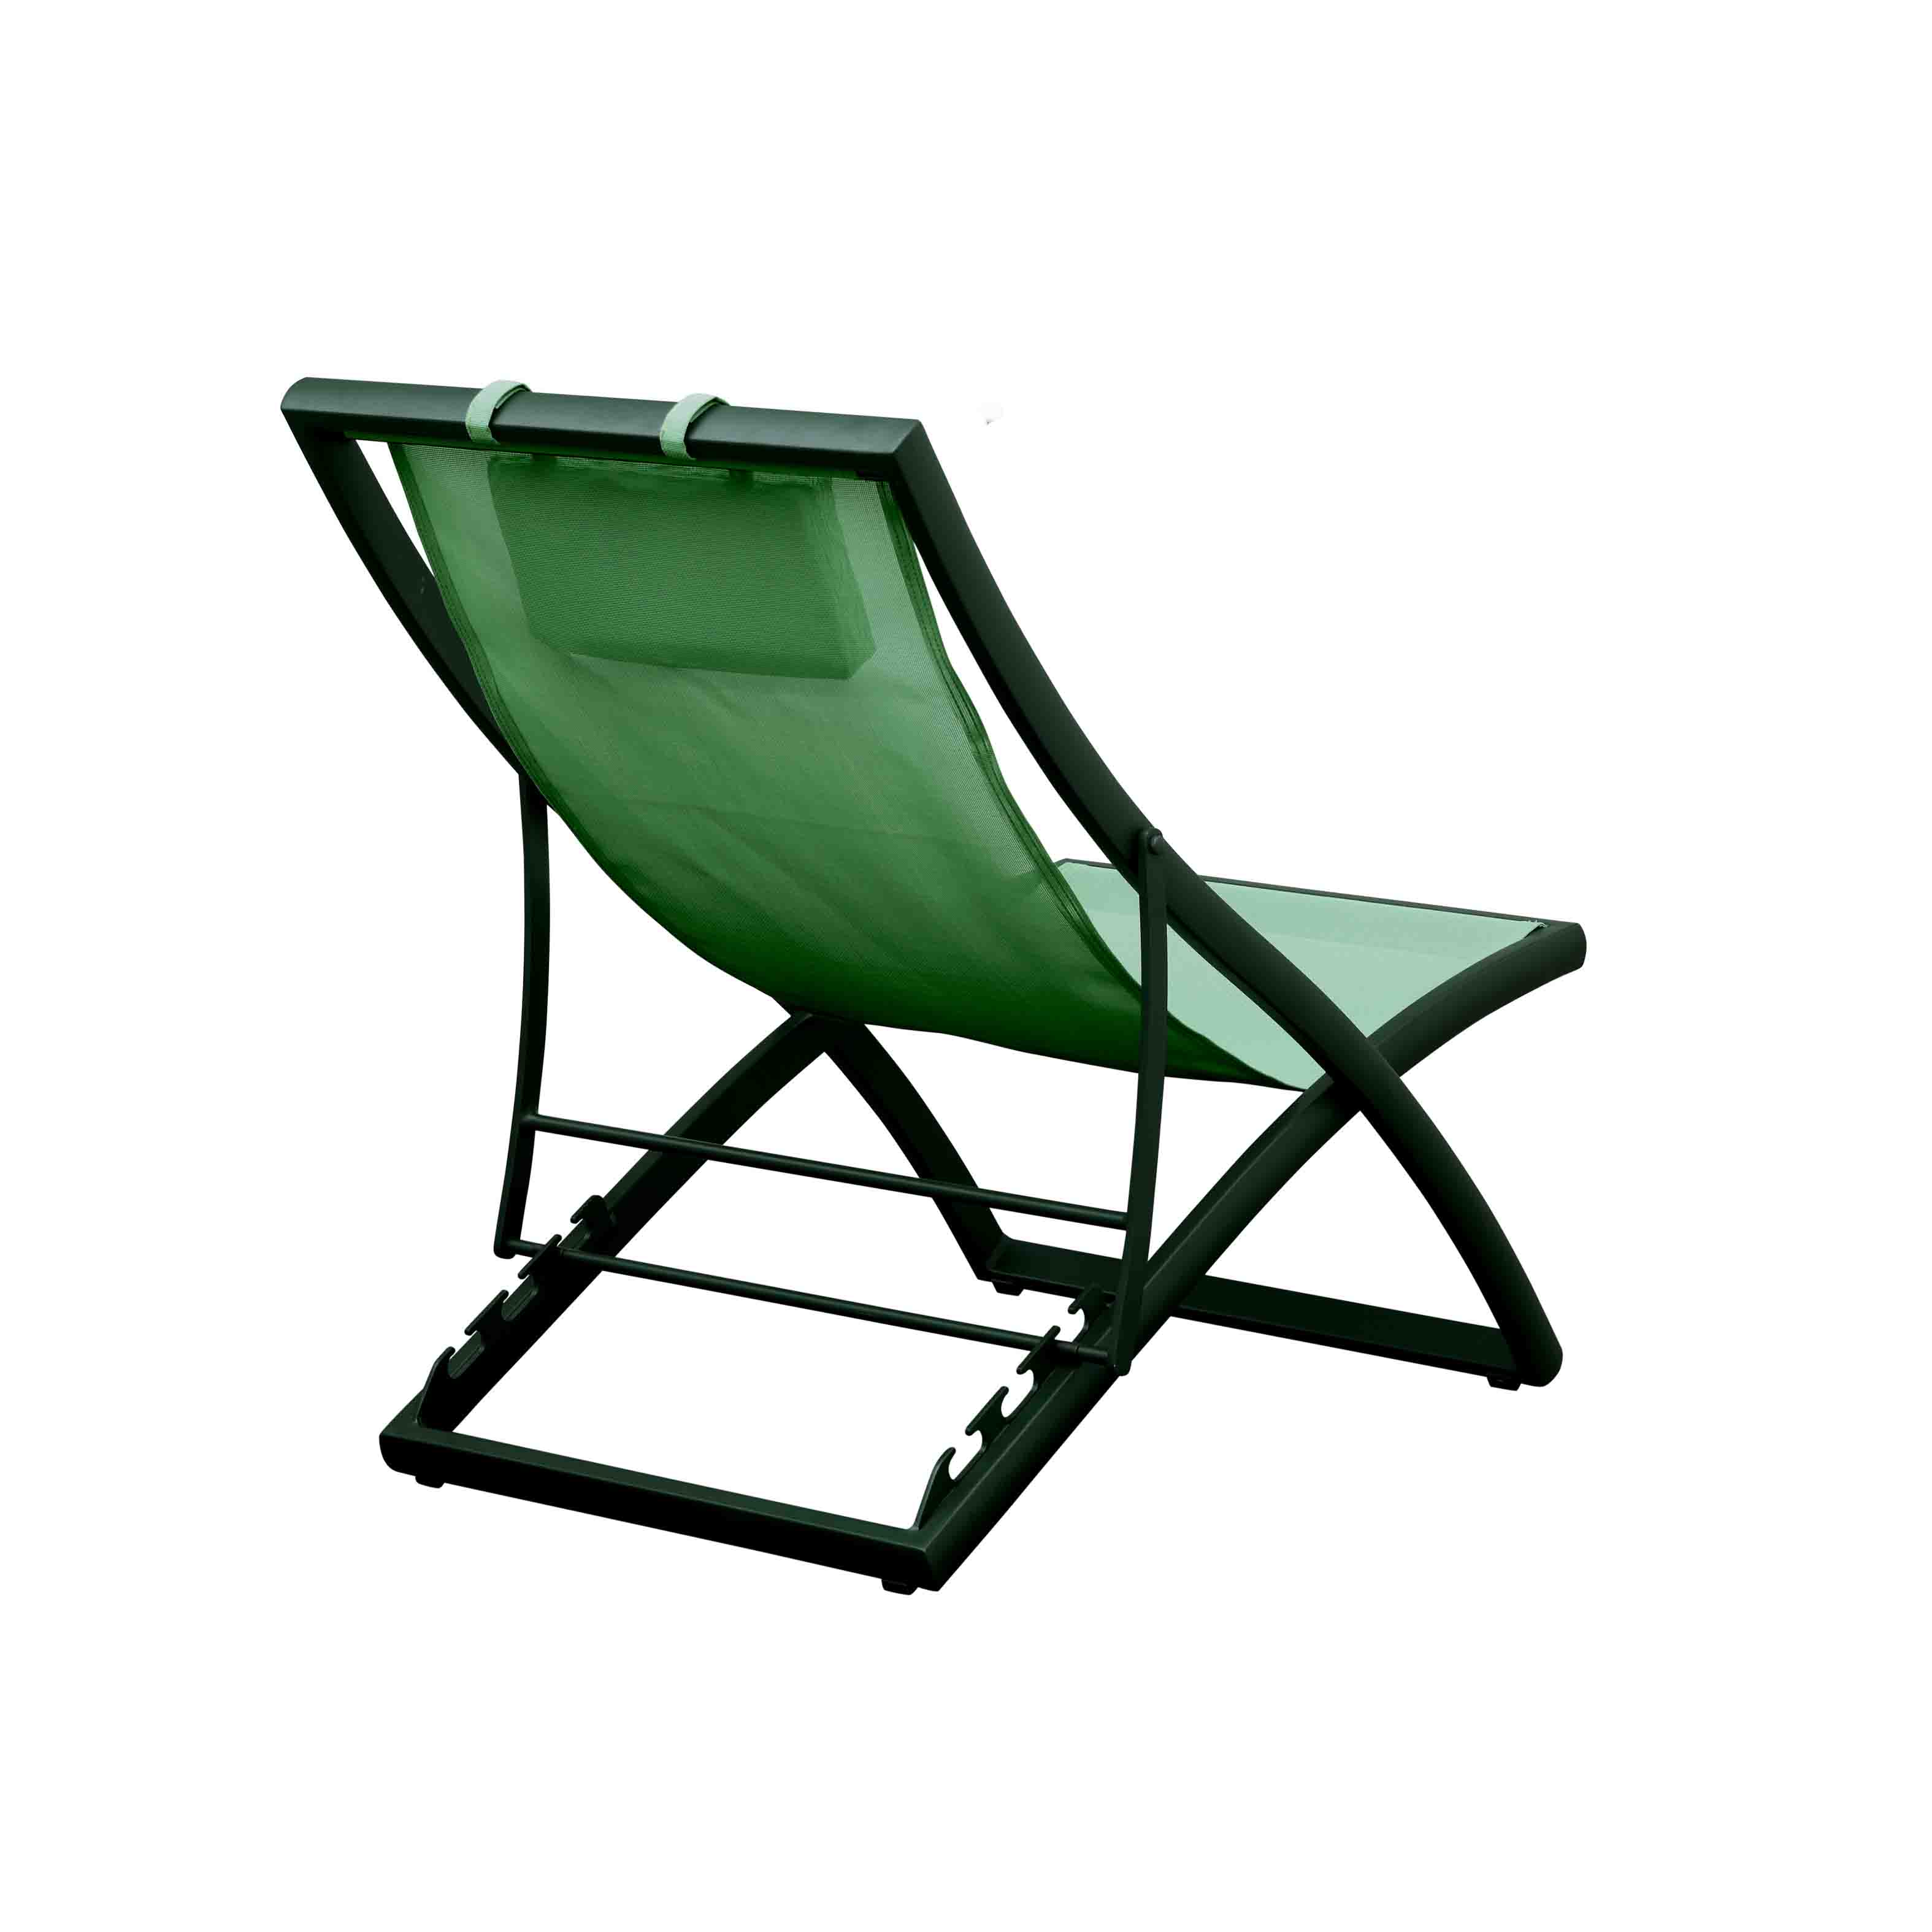 Tiffany sling relax chair S6